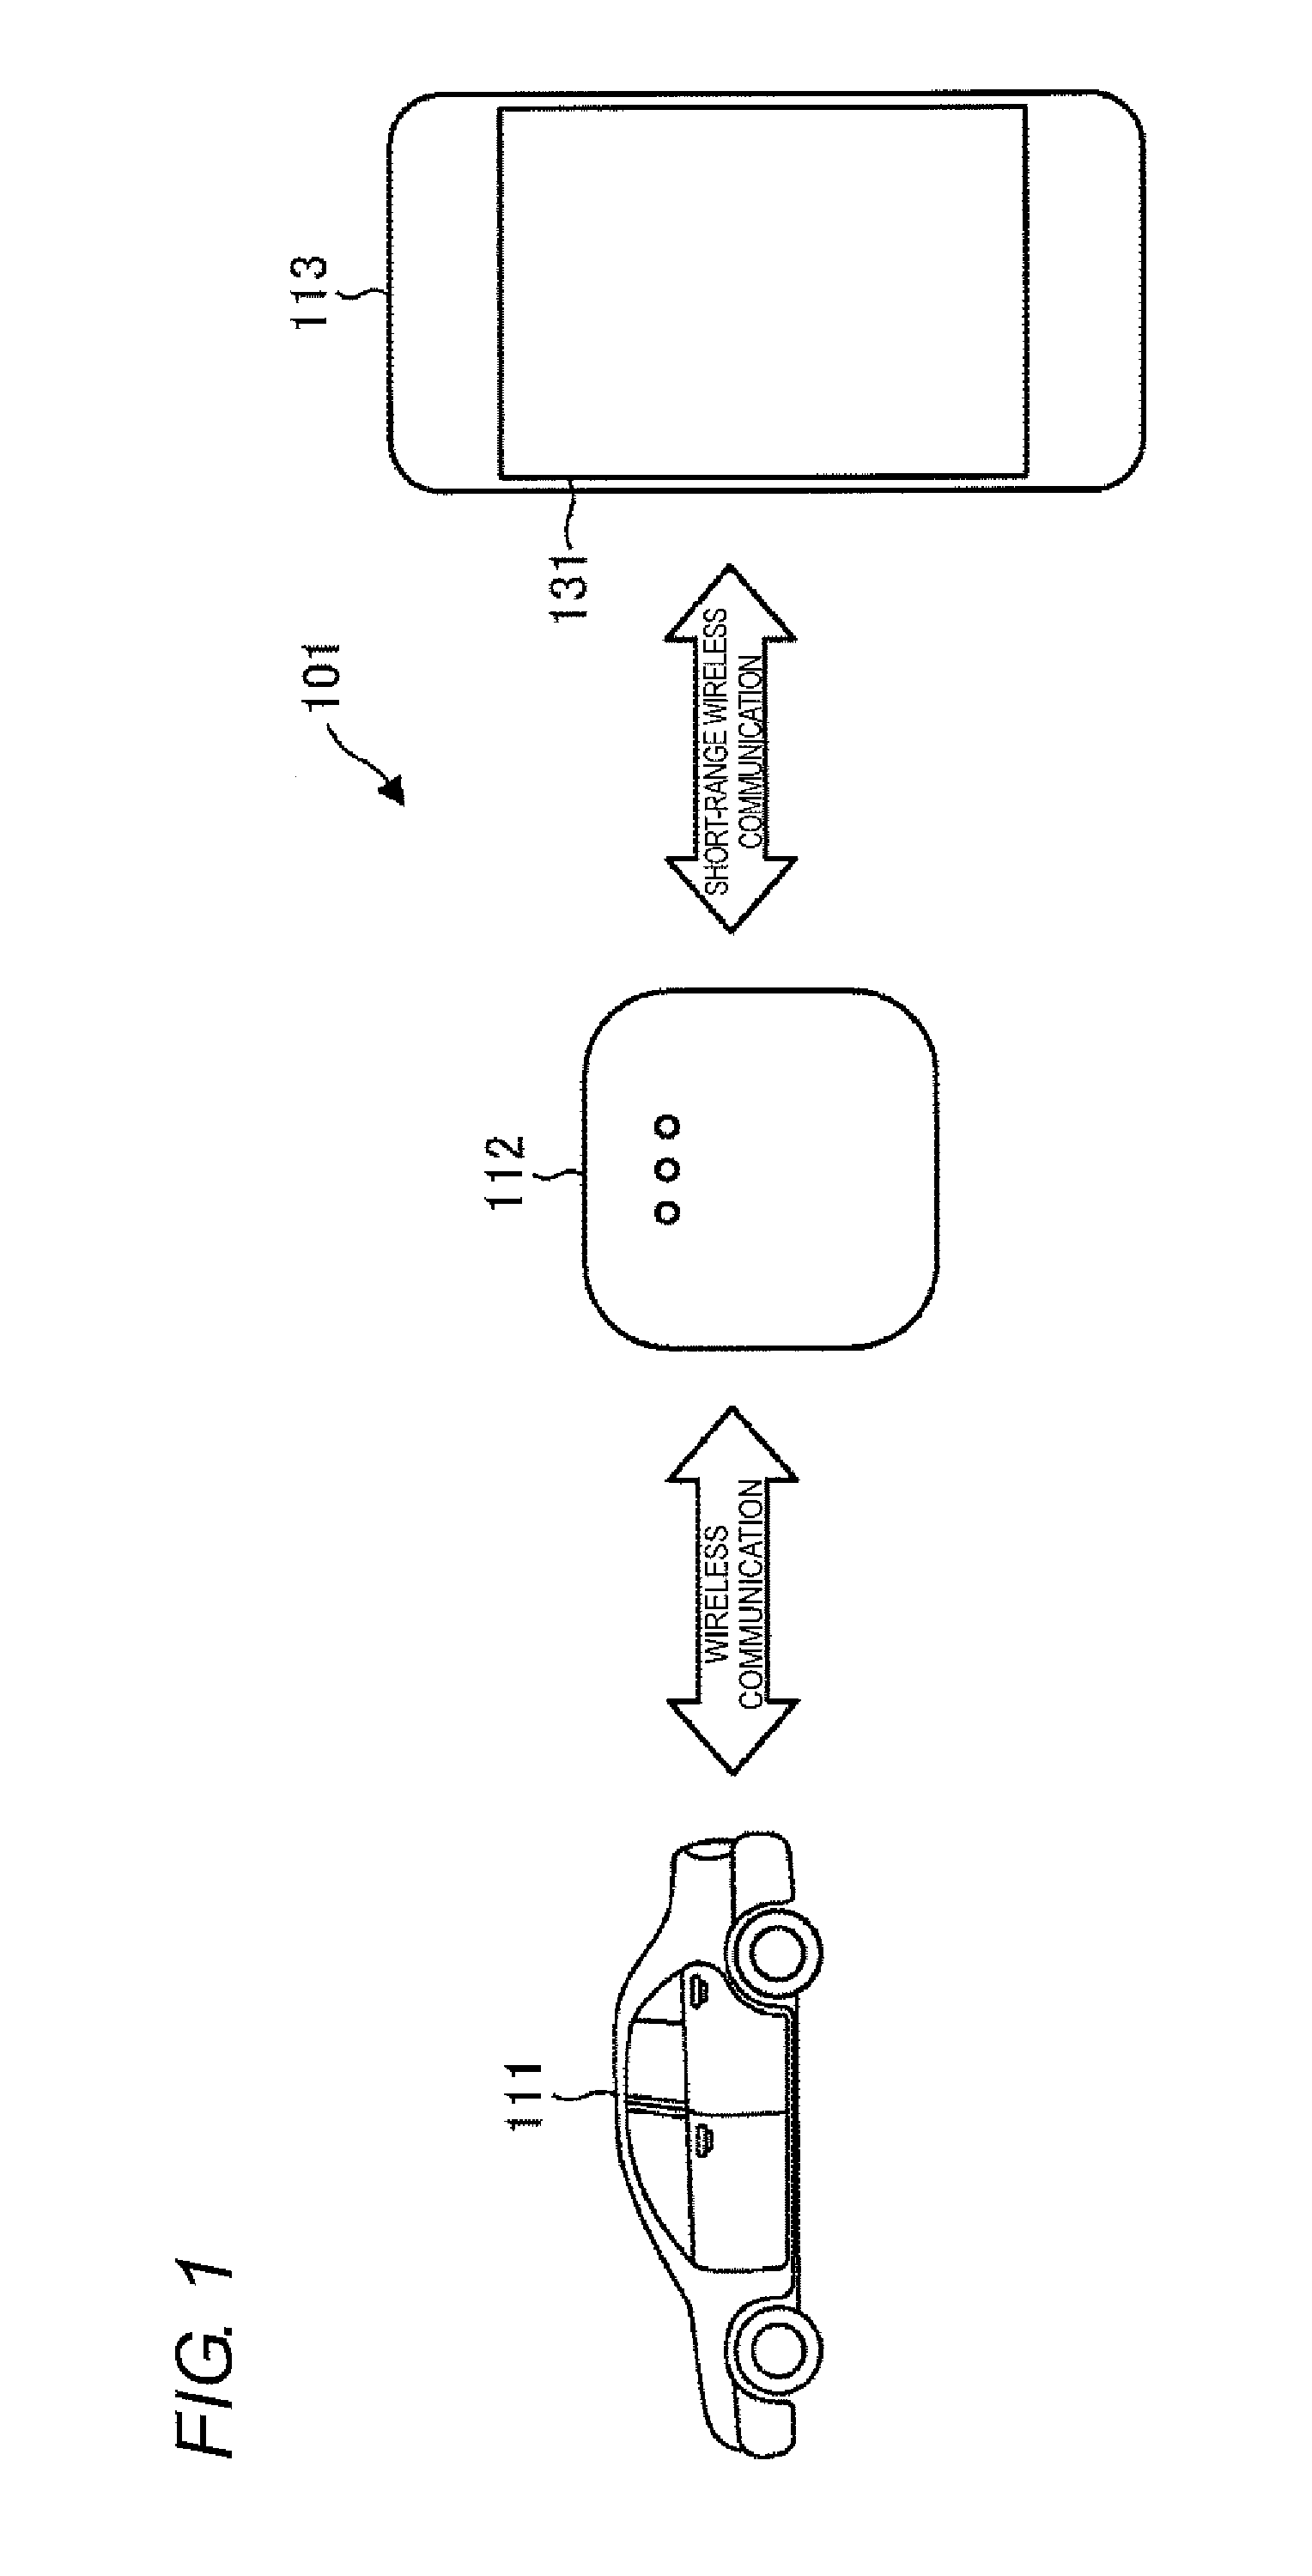 Vehicle portable device and information communication system